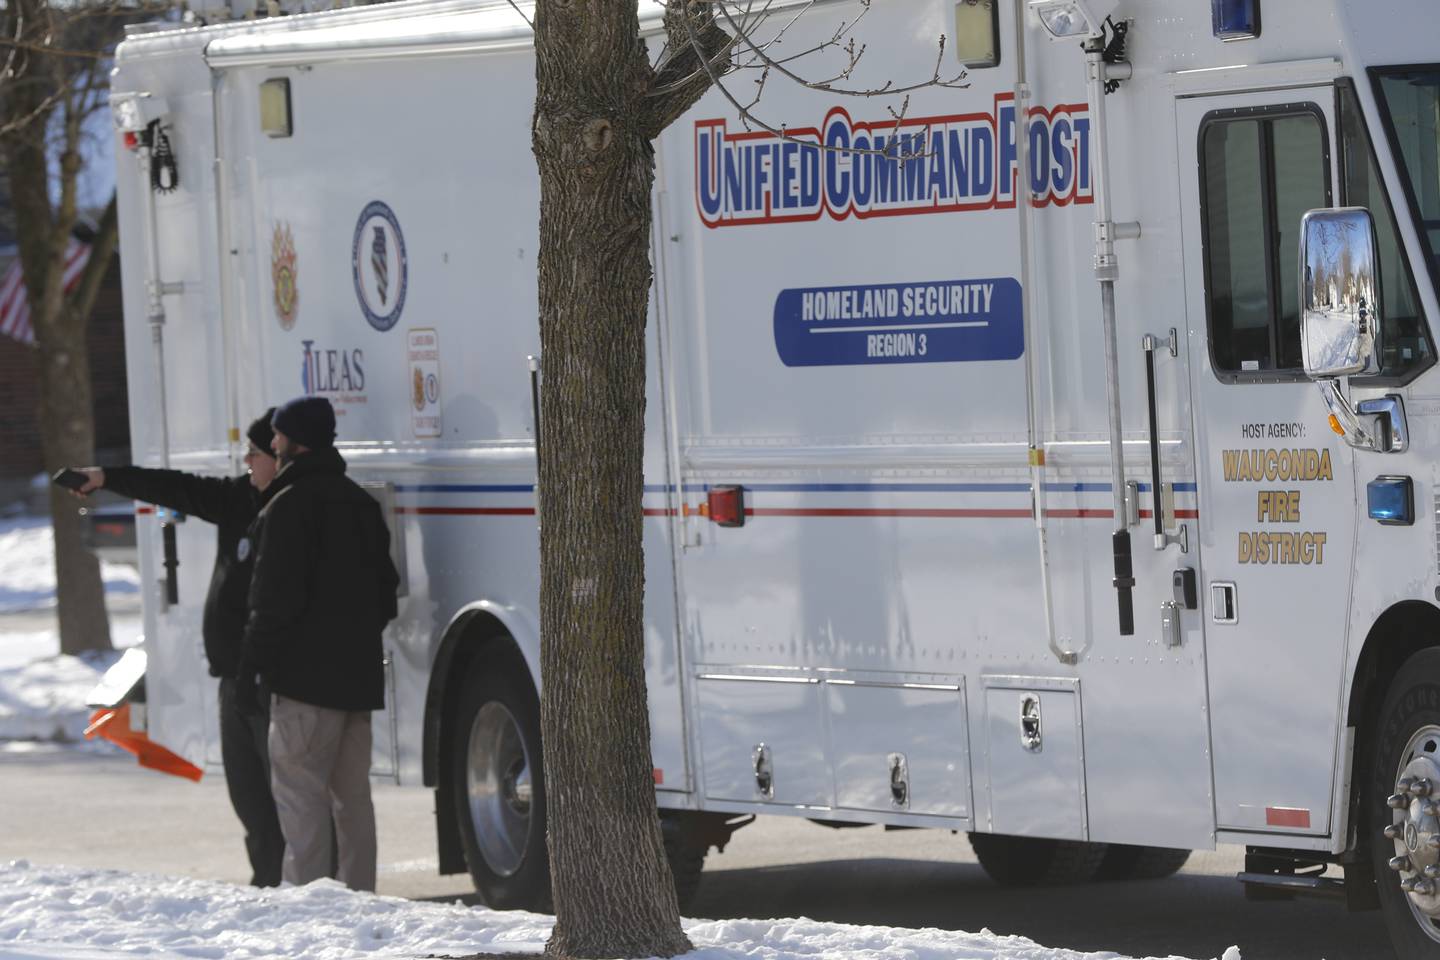 Investigators from multiple law enforcement agencies were probing the scene outside a Port Barrington home on Manchester Lane in the River Walk neighborhood on Tuesday, Jan. 11, after McHenry County Sheriff's Deputies shot and killed a person who allegedly opened gunfire on a woman and deputies in the early morning hours.